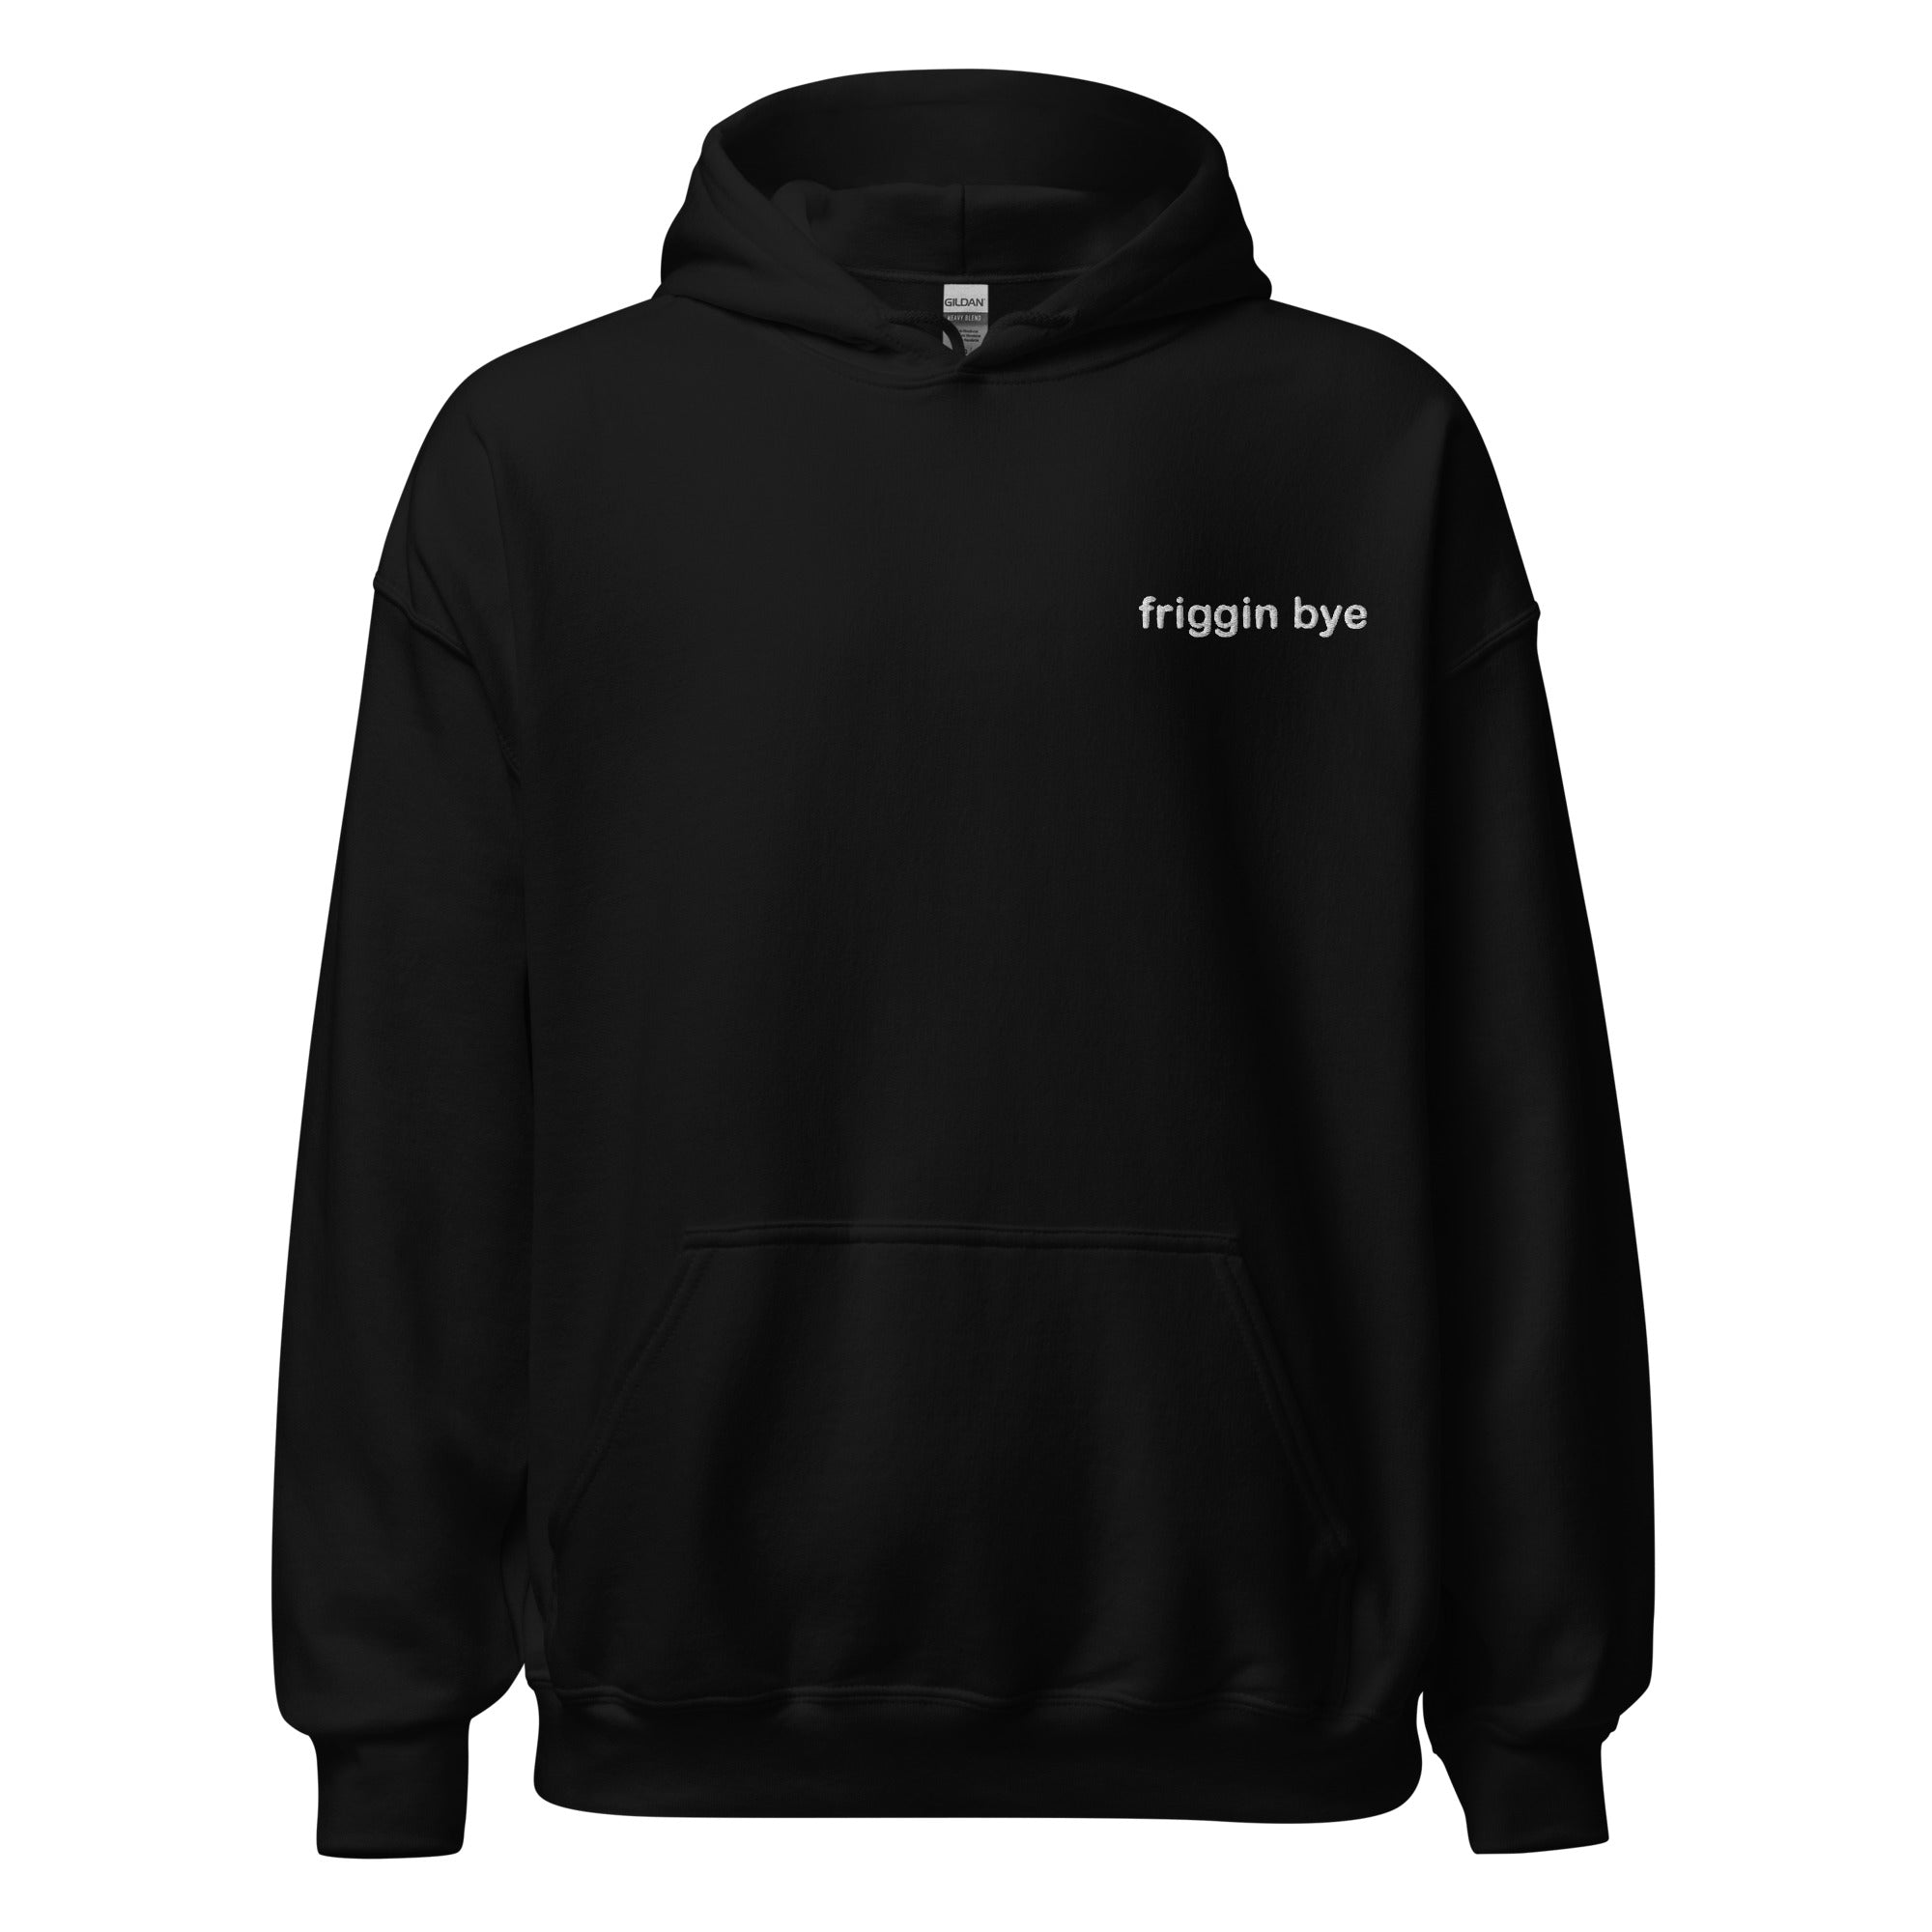 "Friggin Bye" Adult Hoodie Unisex White Embroidered